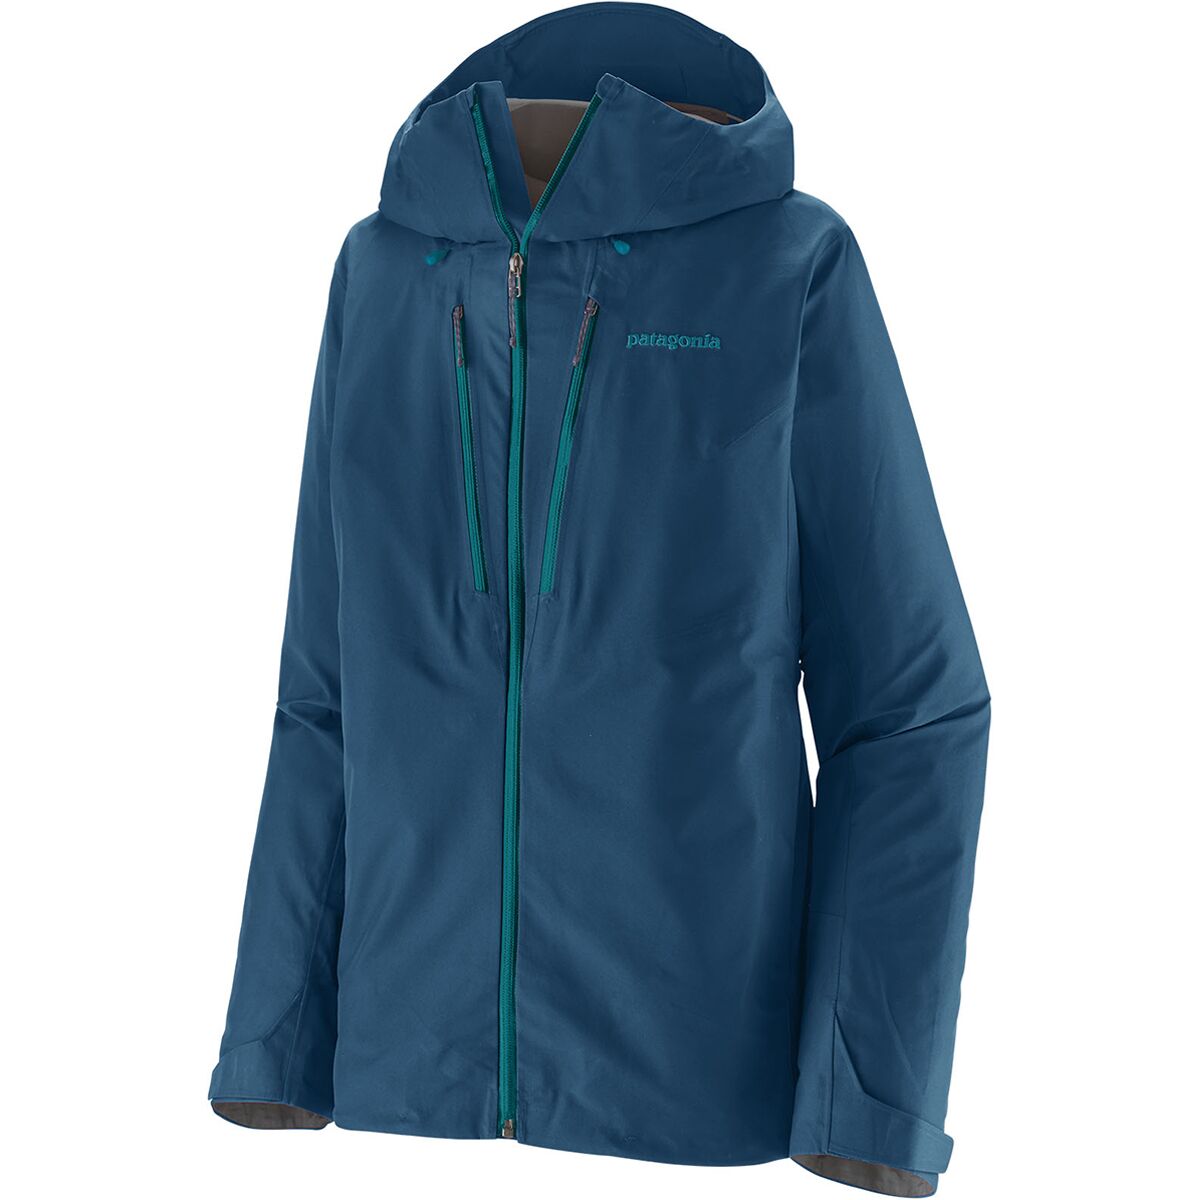 Patagonia - Women's Triolet Gore-Tex Shell Jacket (2 colors)